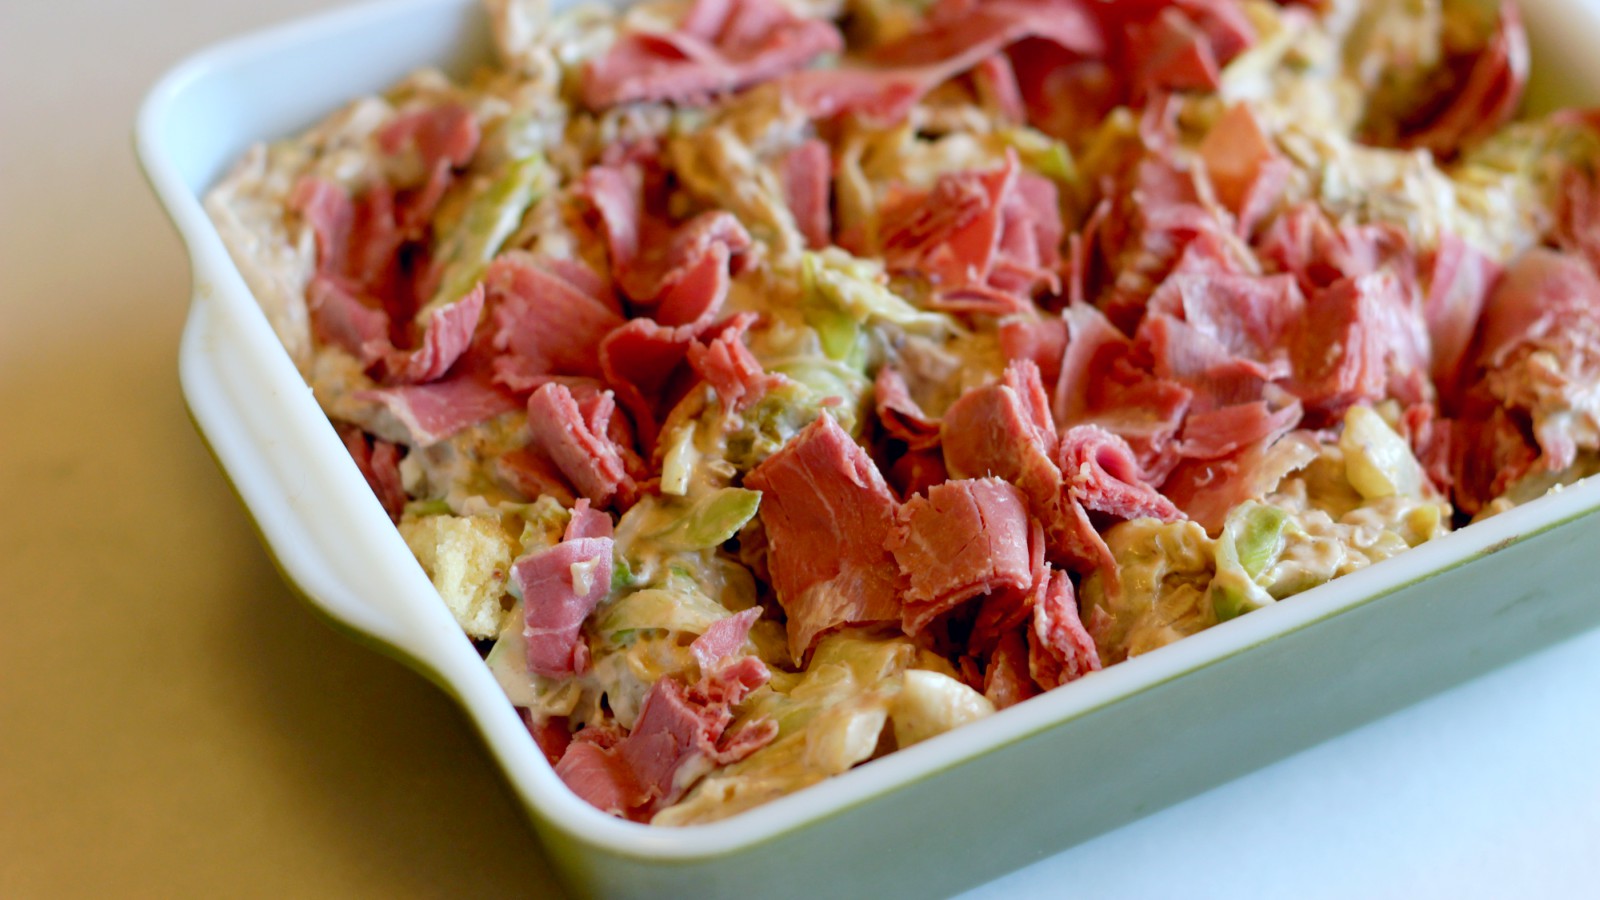 Eat This Corned Beef Casserole To Soak Up Your St Patrick’s Day Libations